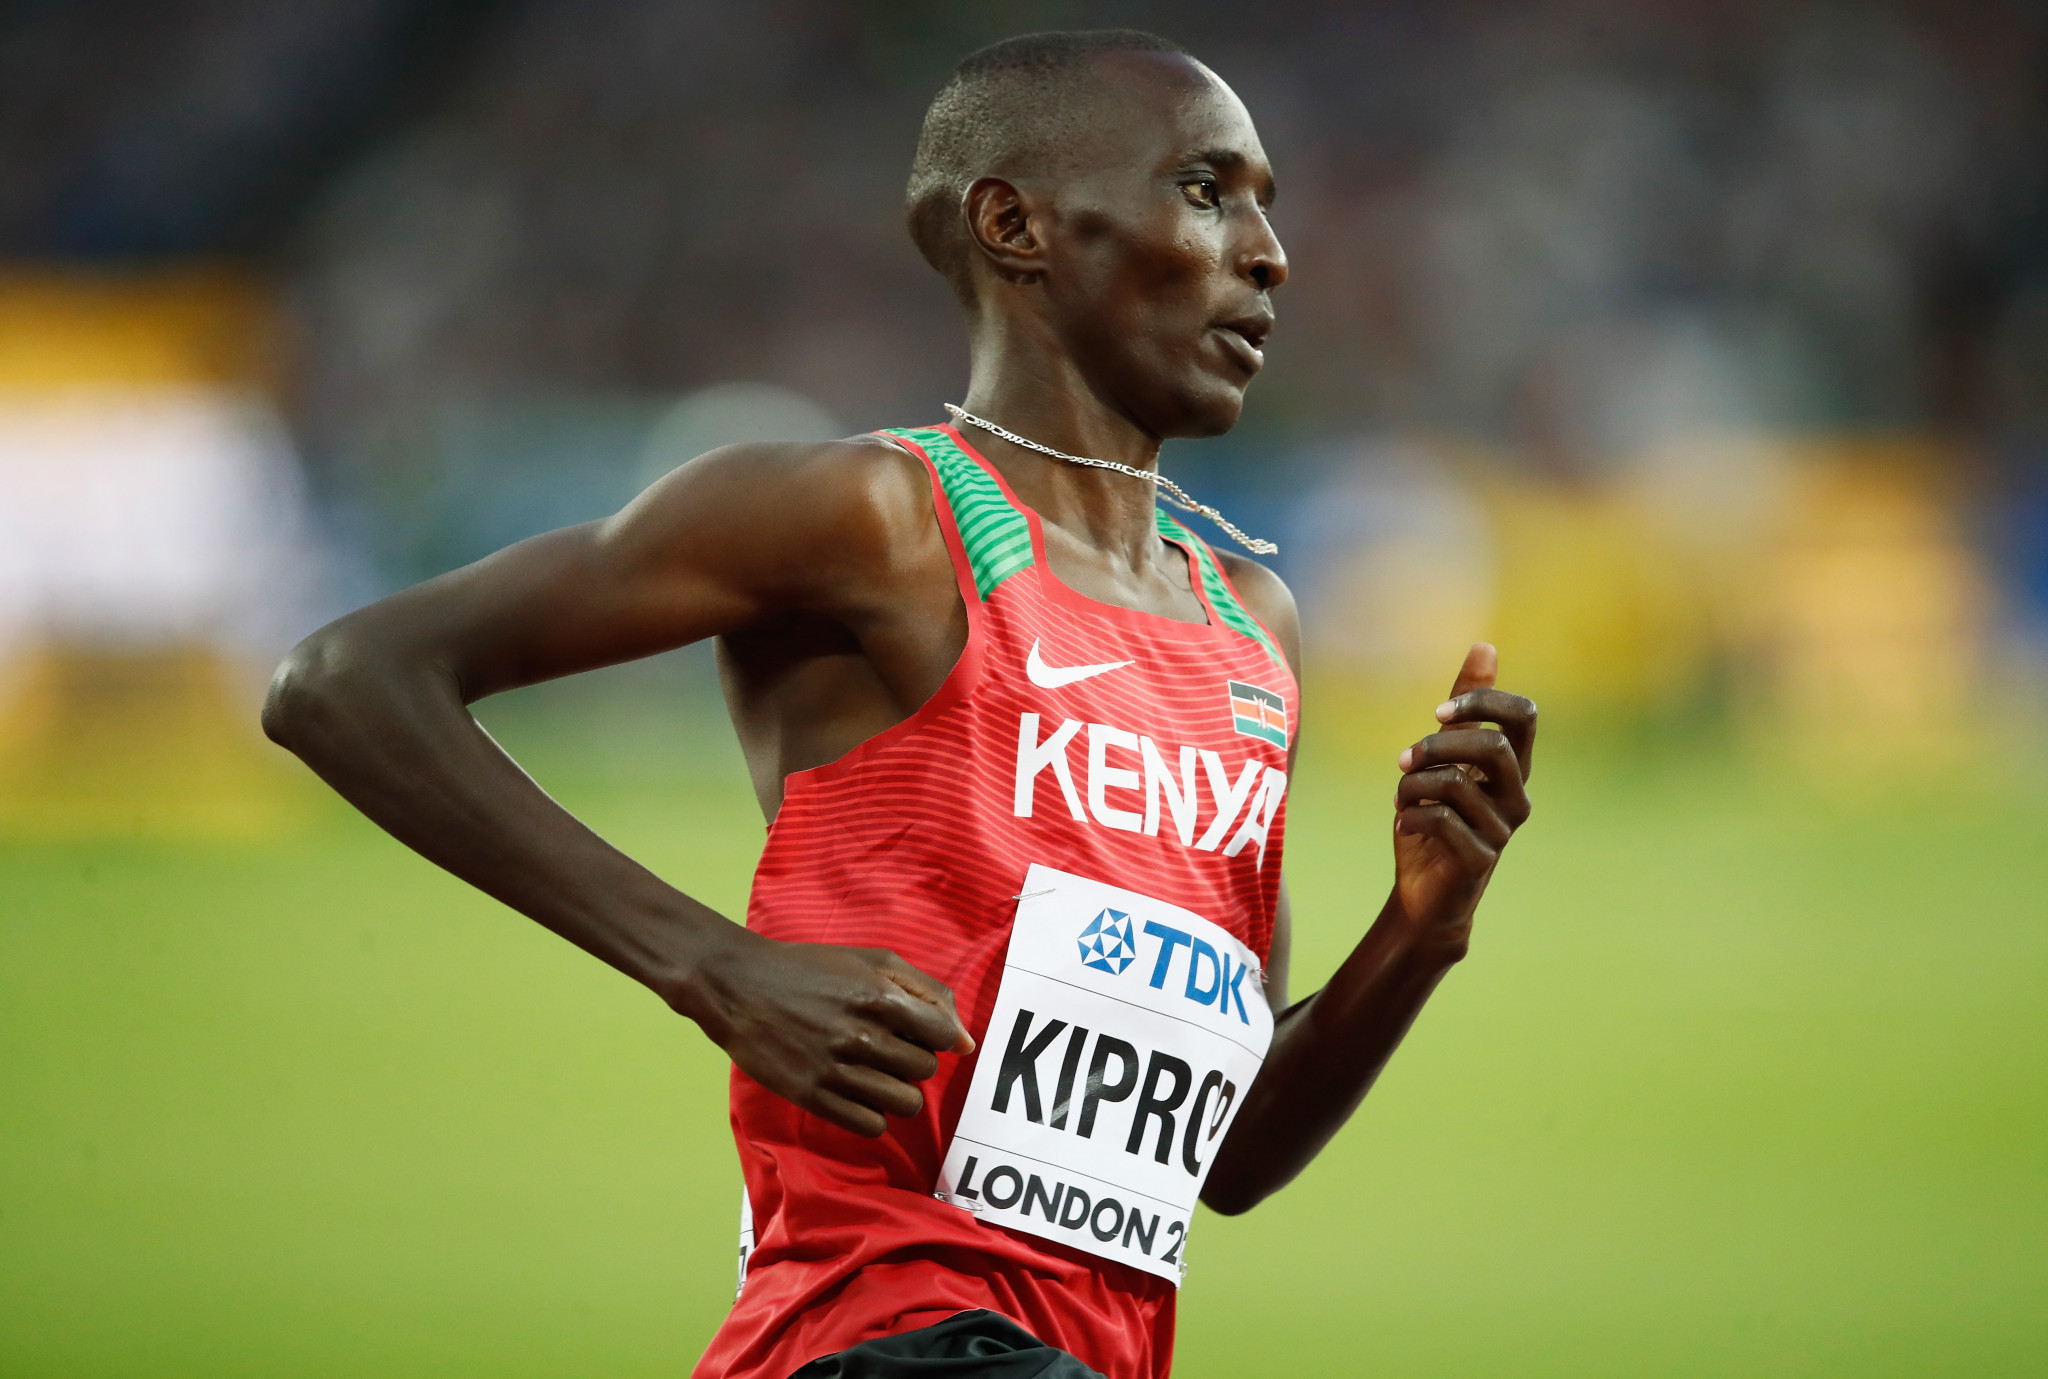 Kenyan middle-distance runner Asbel Kiprop recently tested positive for a banned substance before alleging he had been extorted by doping control officers ©Getty Images